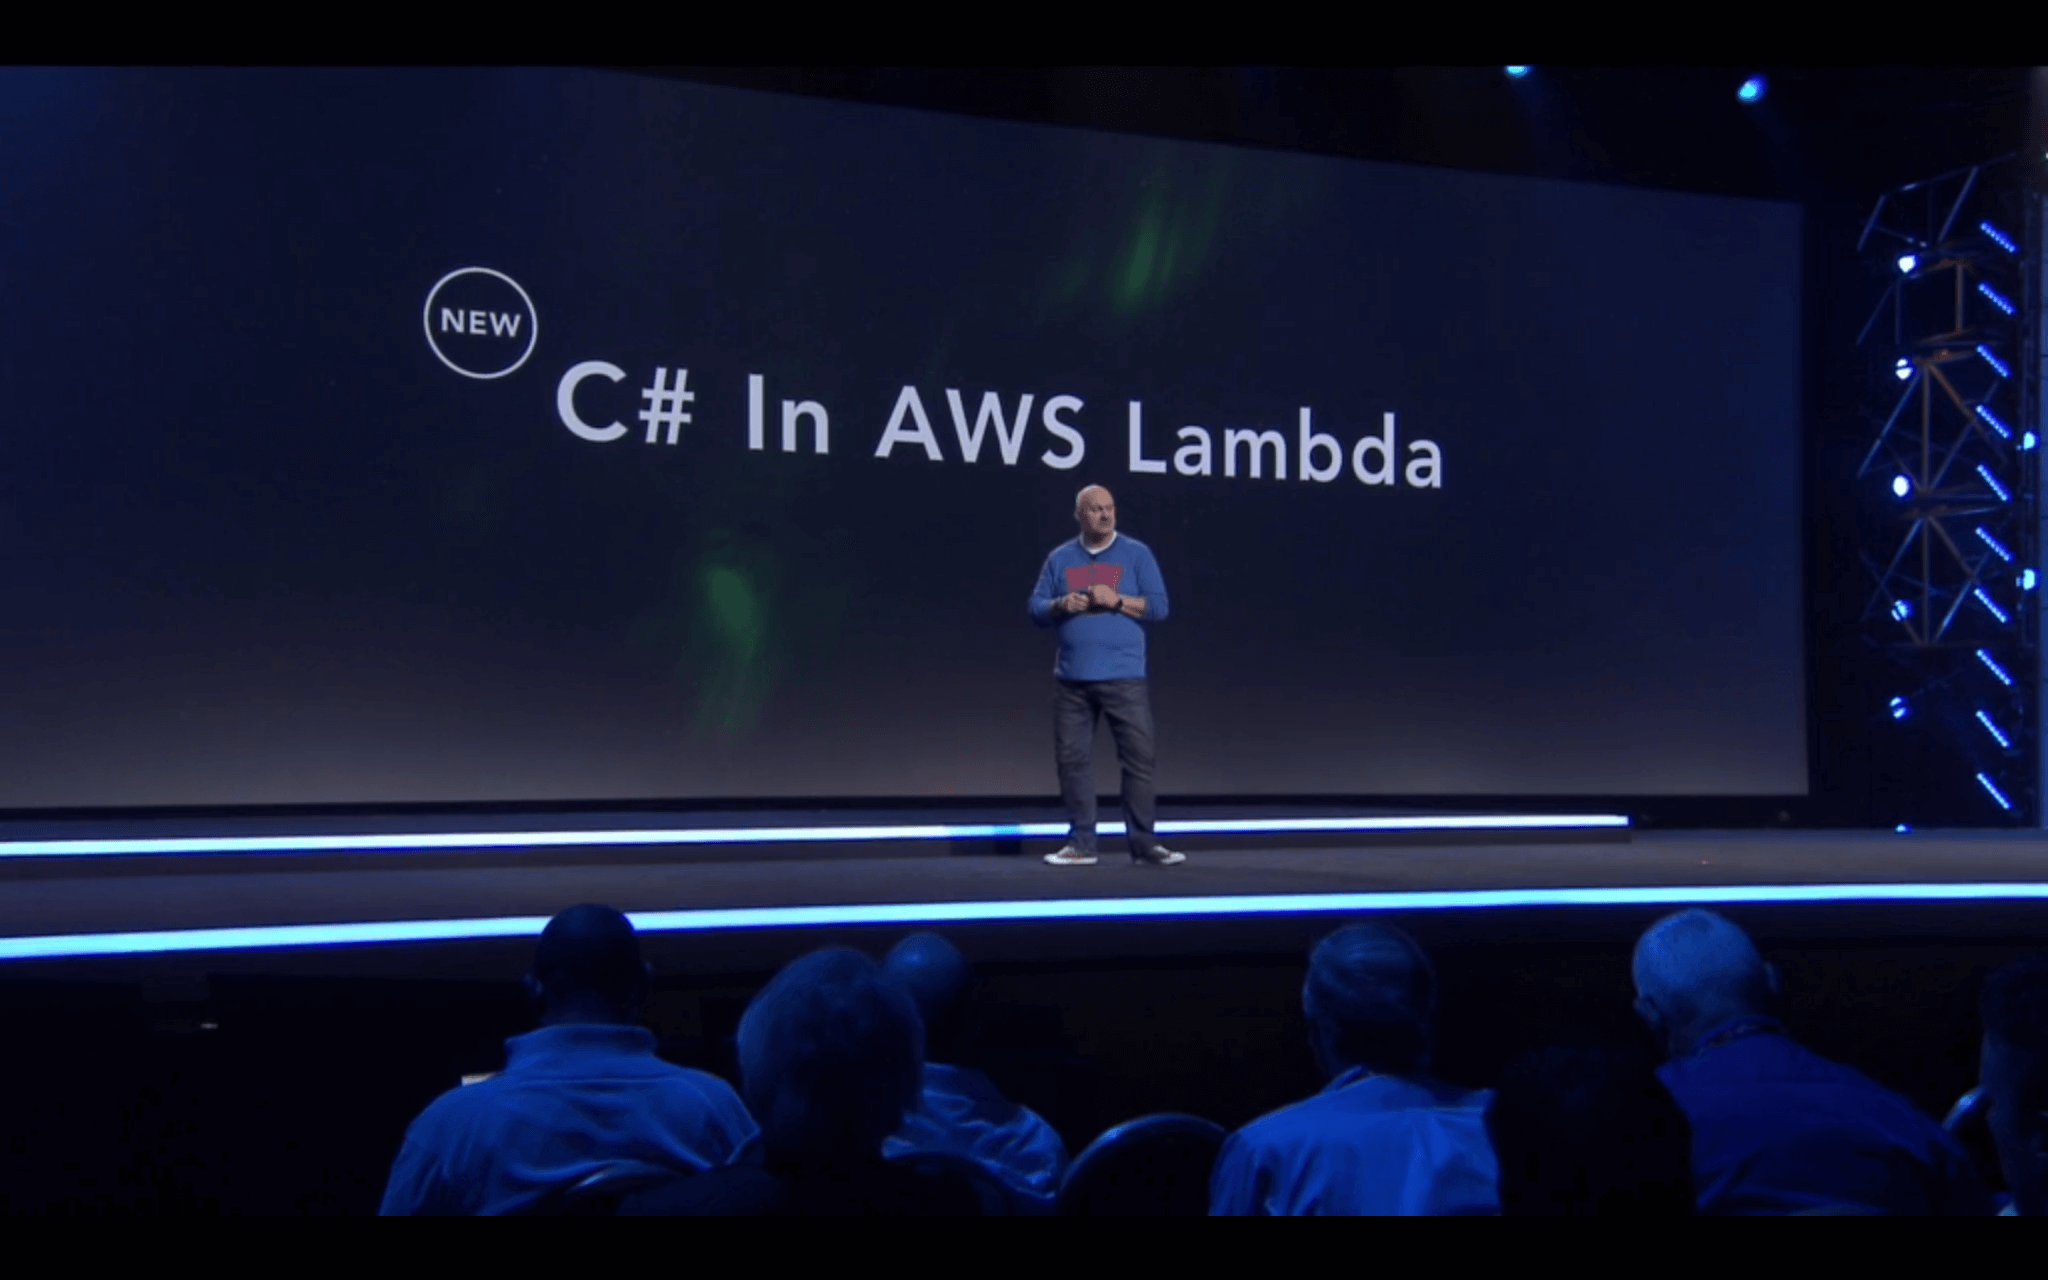 Amazon vice president and chief technology officer Werner Vogels talks about C# support in the AWS Lambda service at the AWS re:Invent conference in Las Vegas on December 1, 2016.